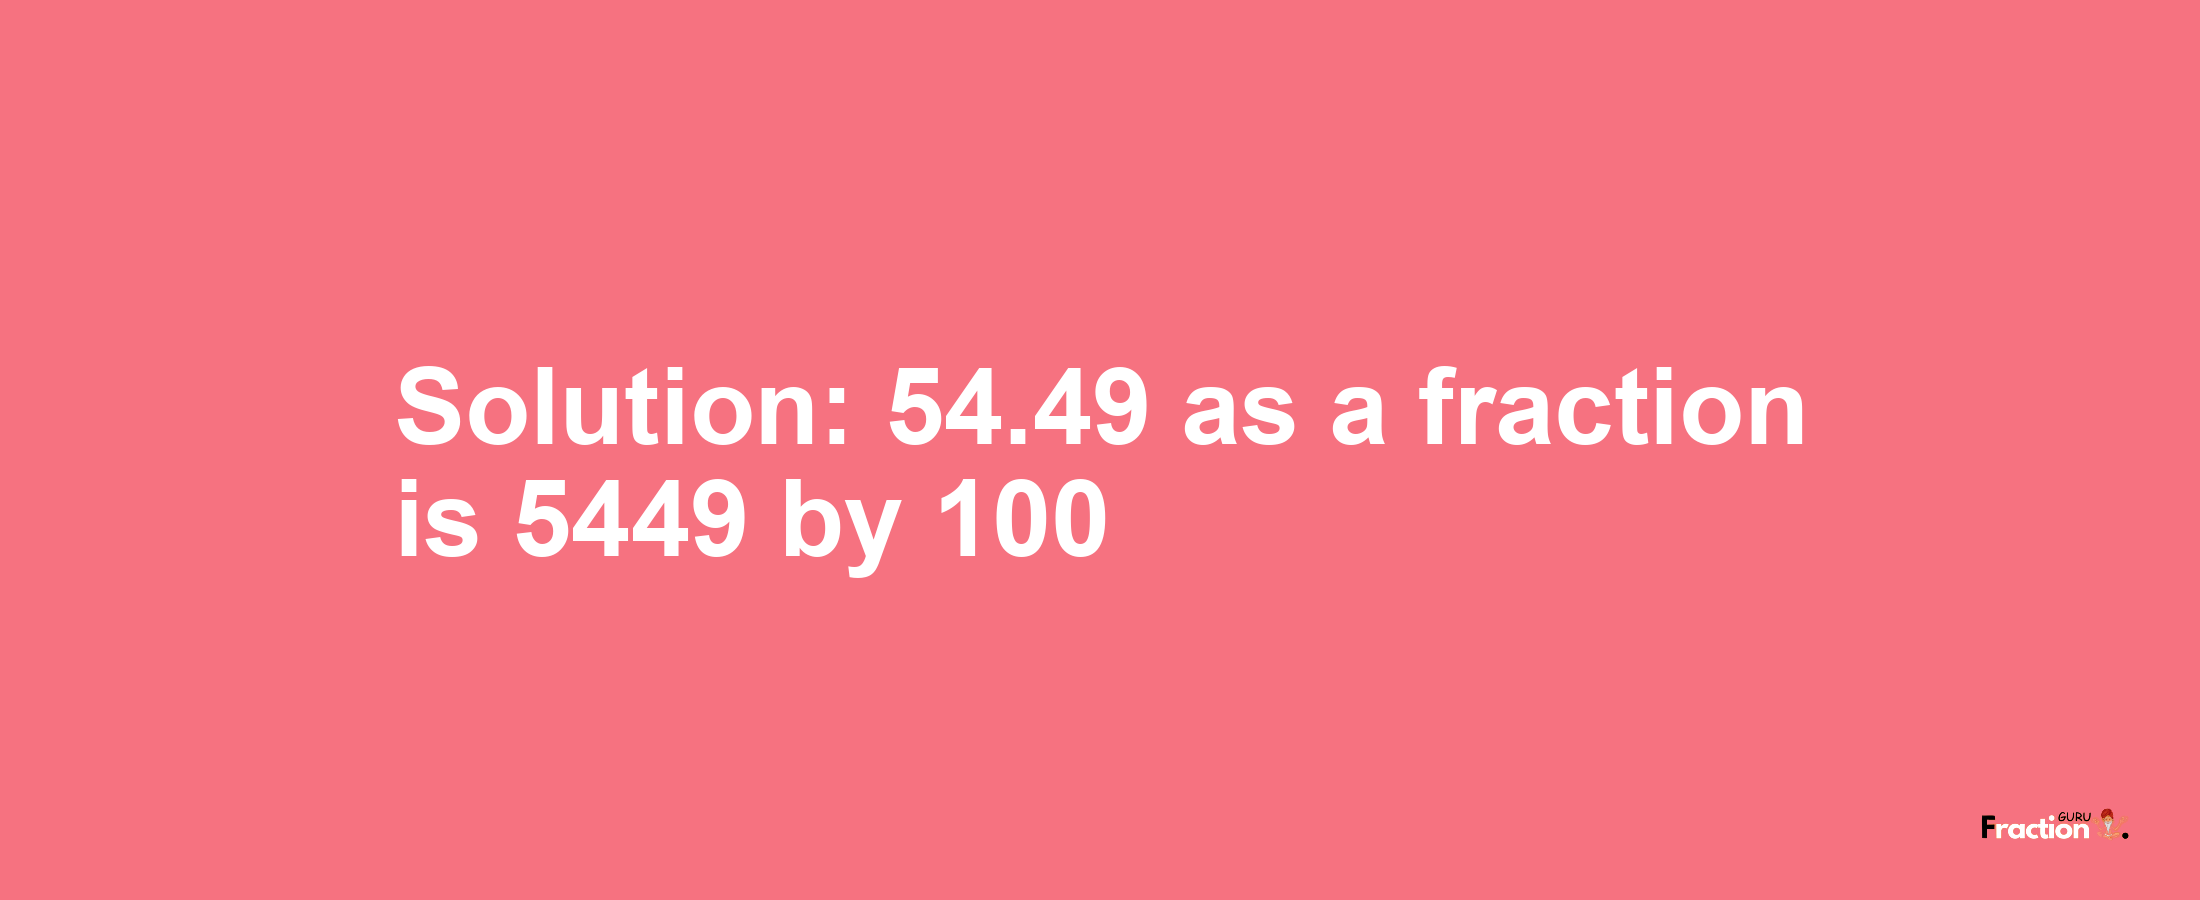 Solution:54.49 as a fraction is 5449/100